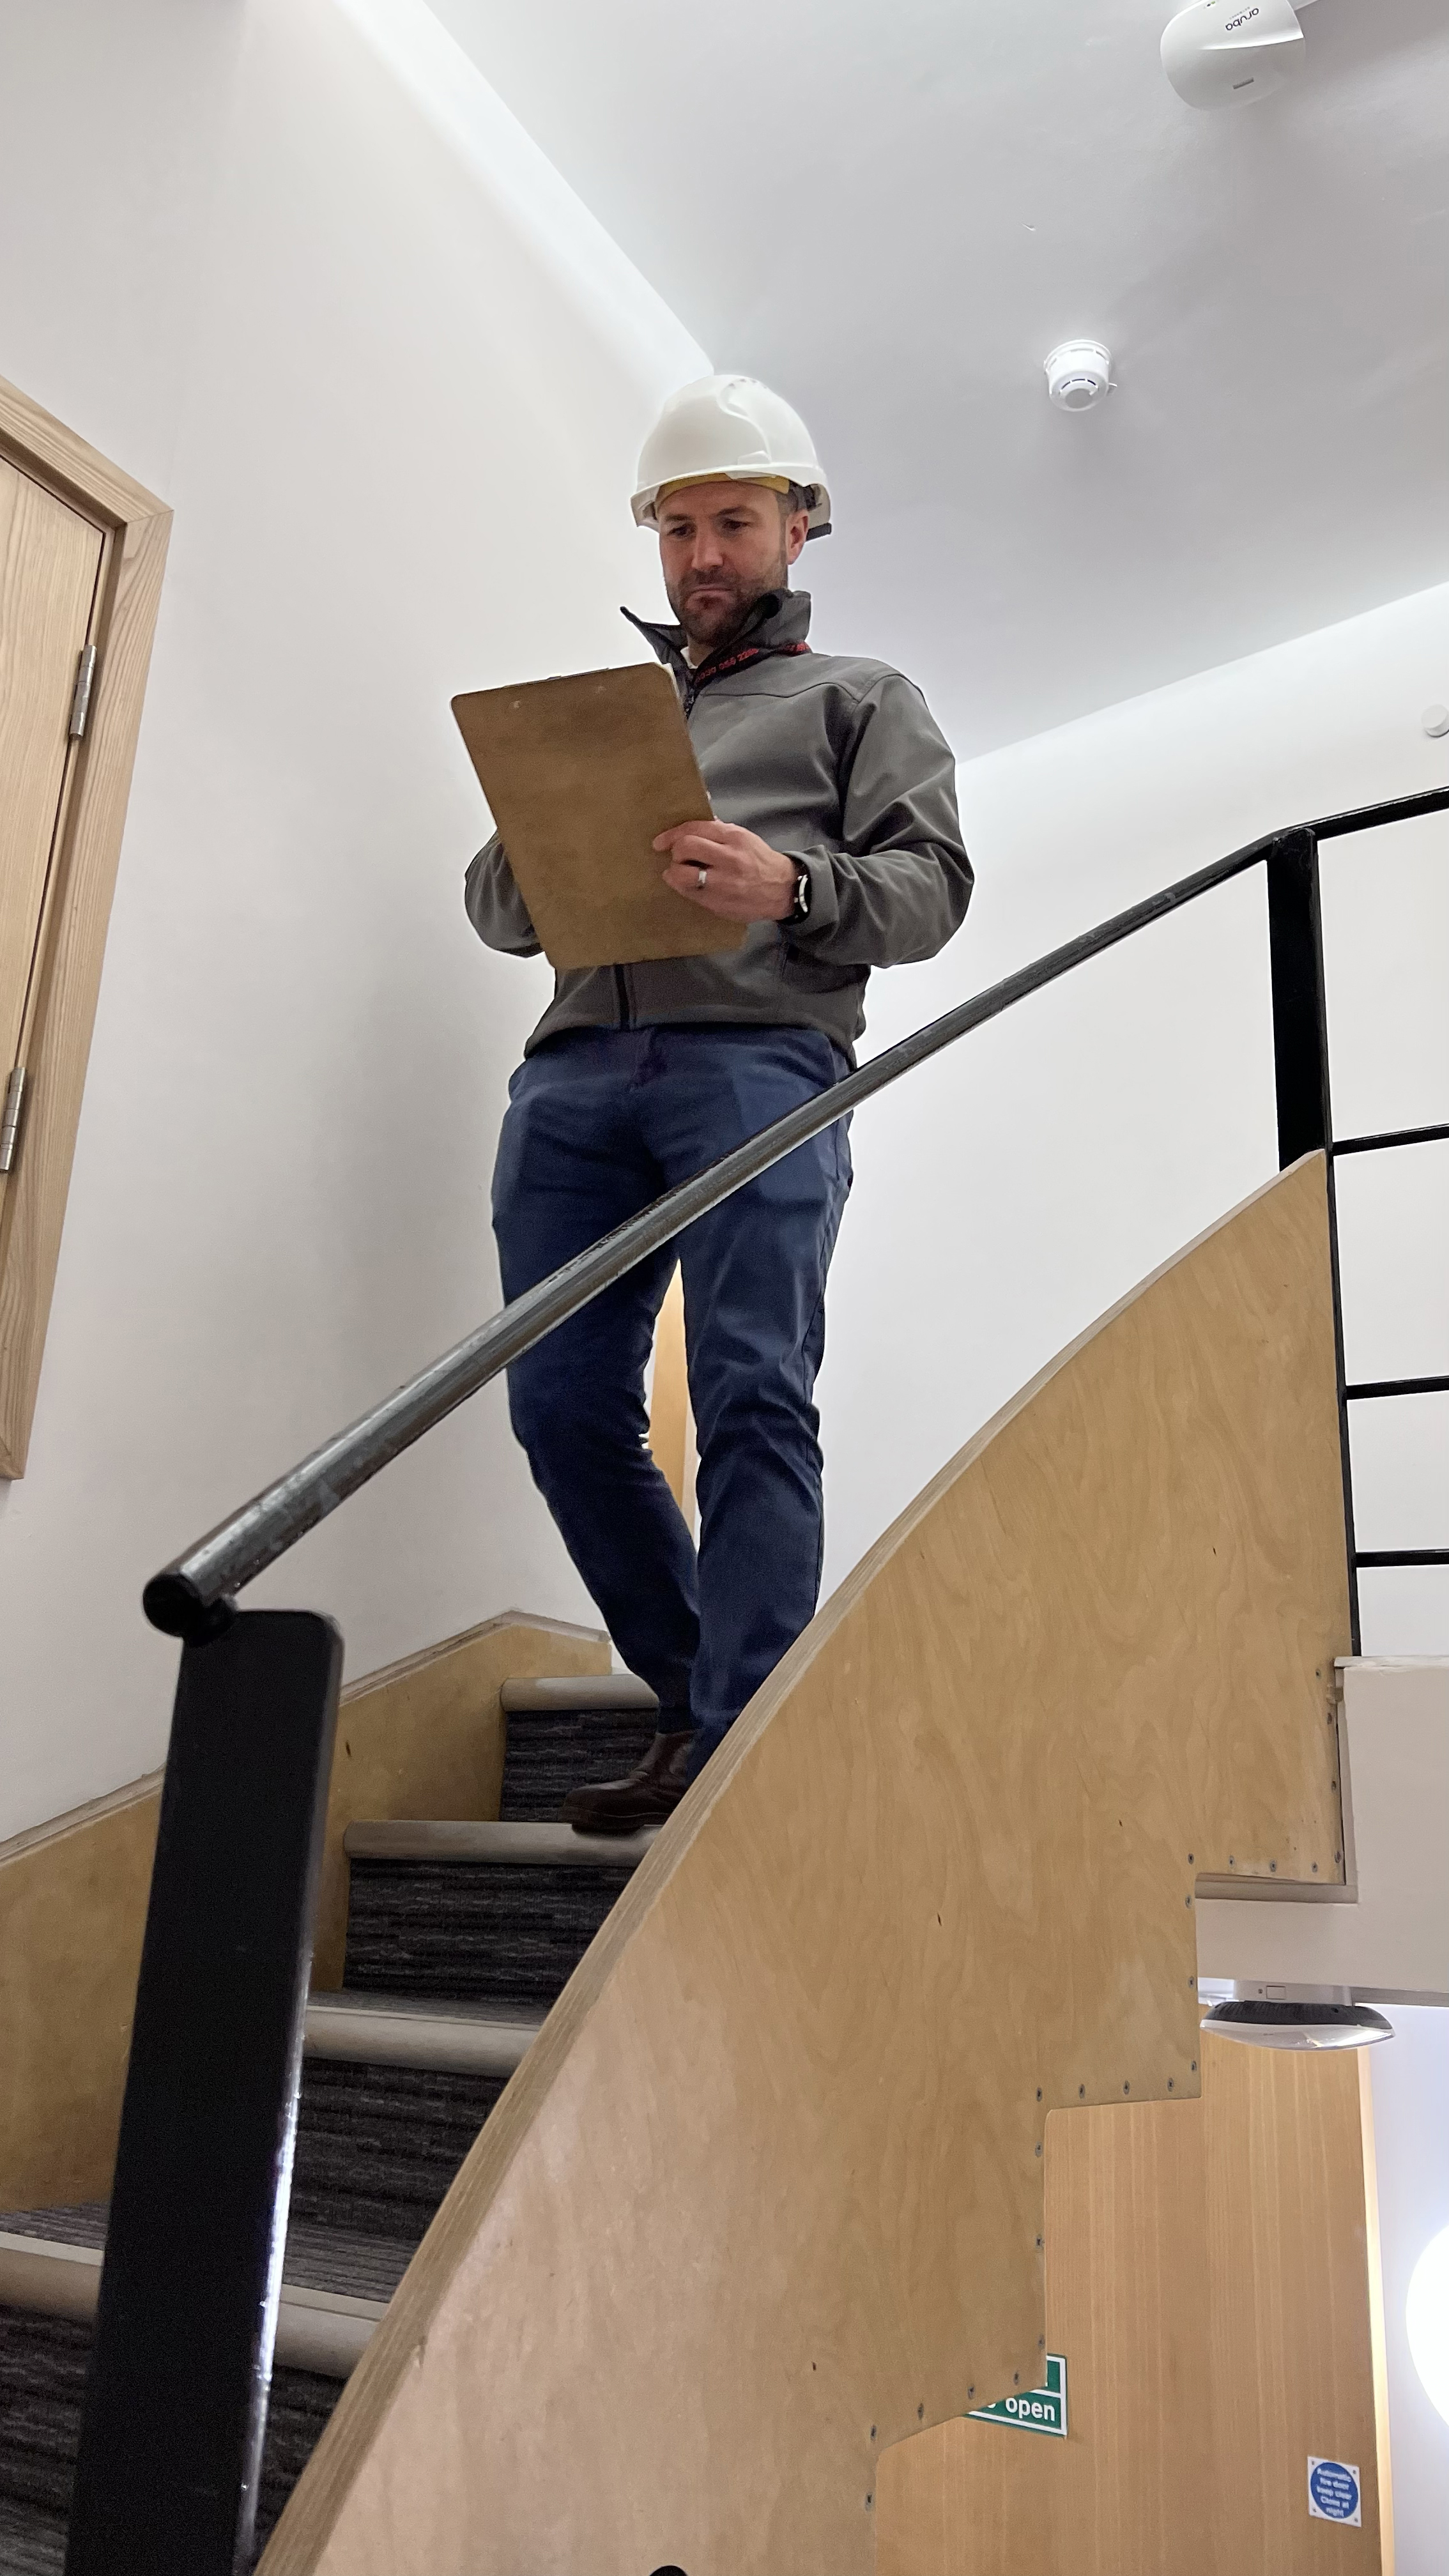 Man in hardhat on Stairs with Clipboard - Fire Prevention